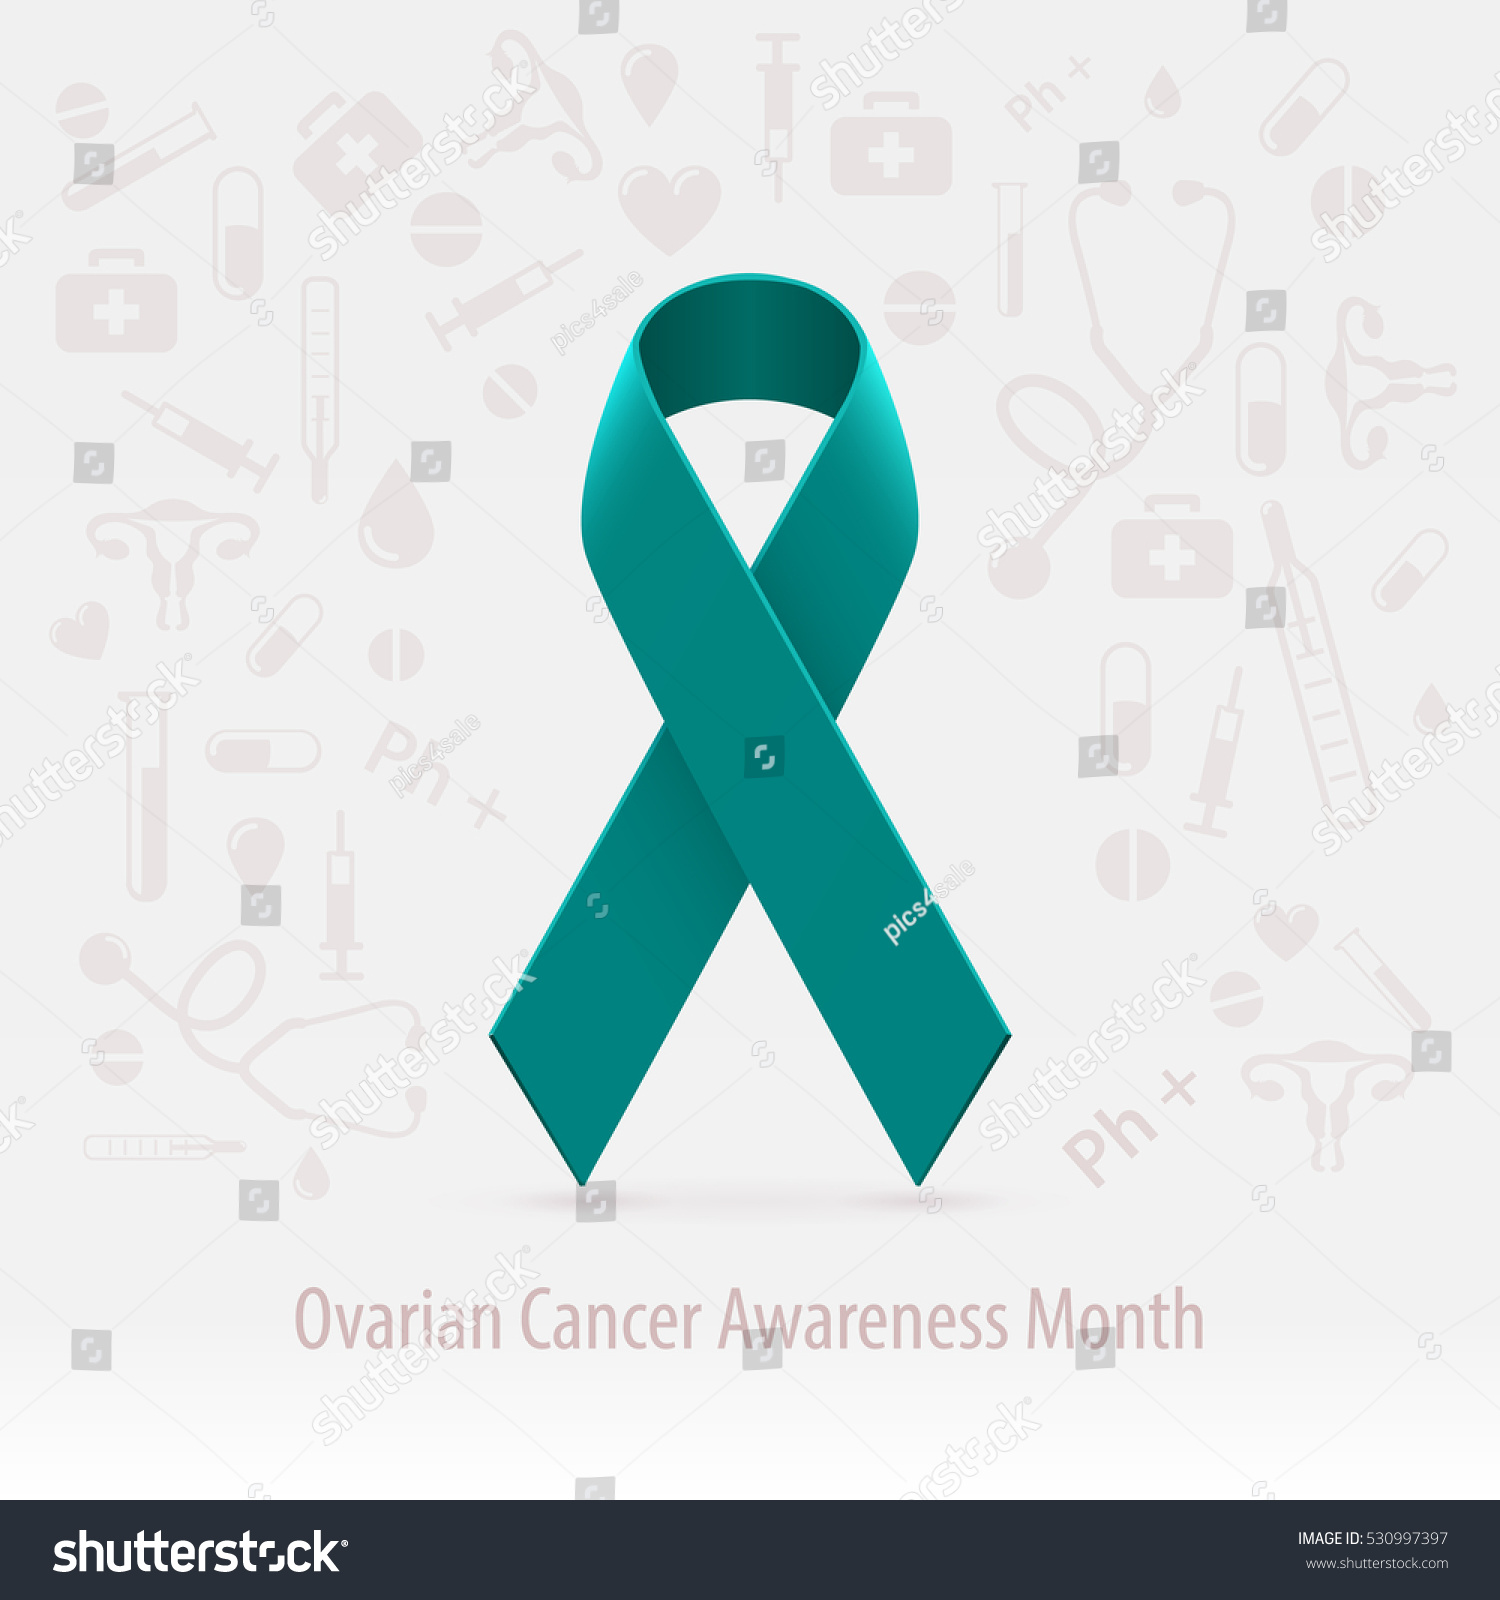 Ovarian Cancer Teal Ribbon Medical Icons Stock Vector Royalty Free 530997397 Shutterstock 